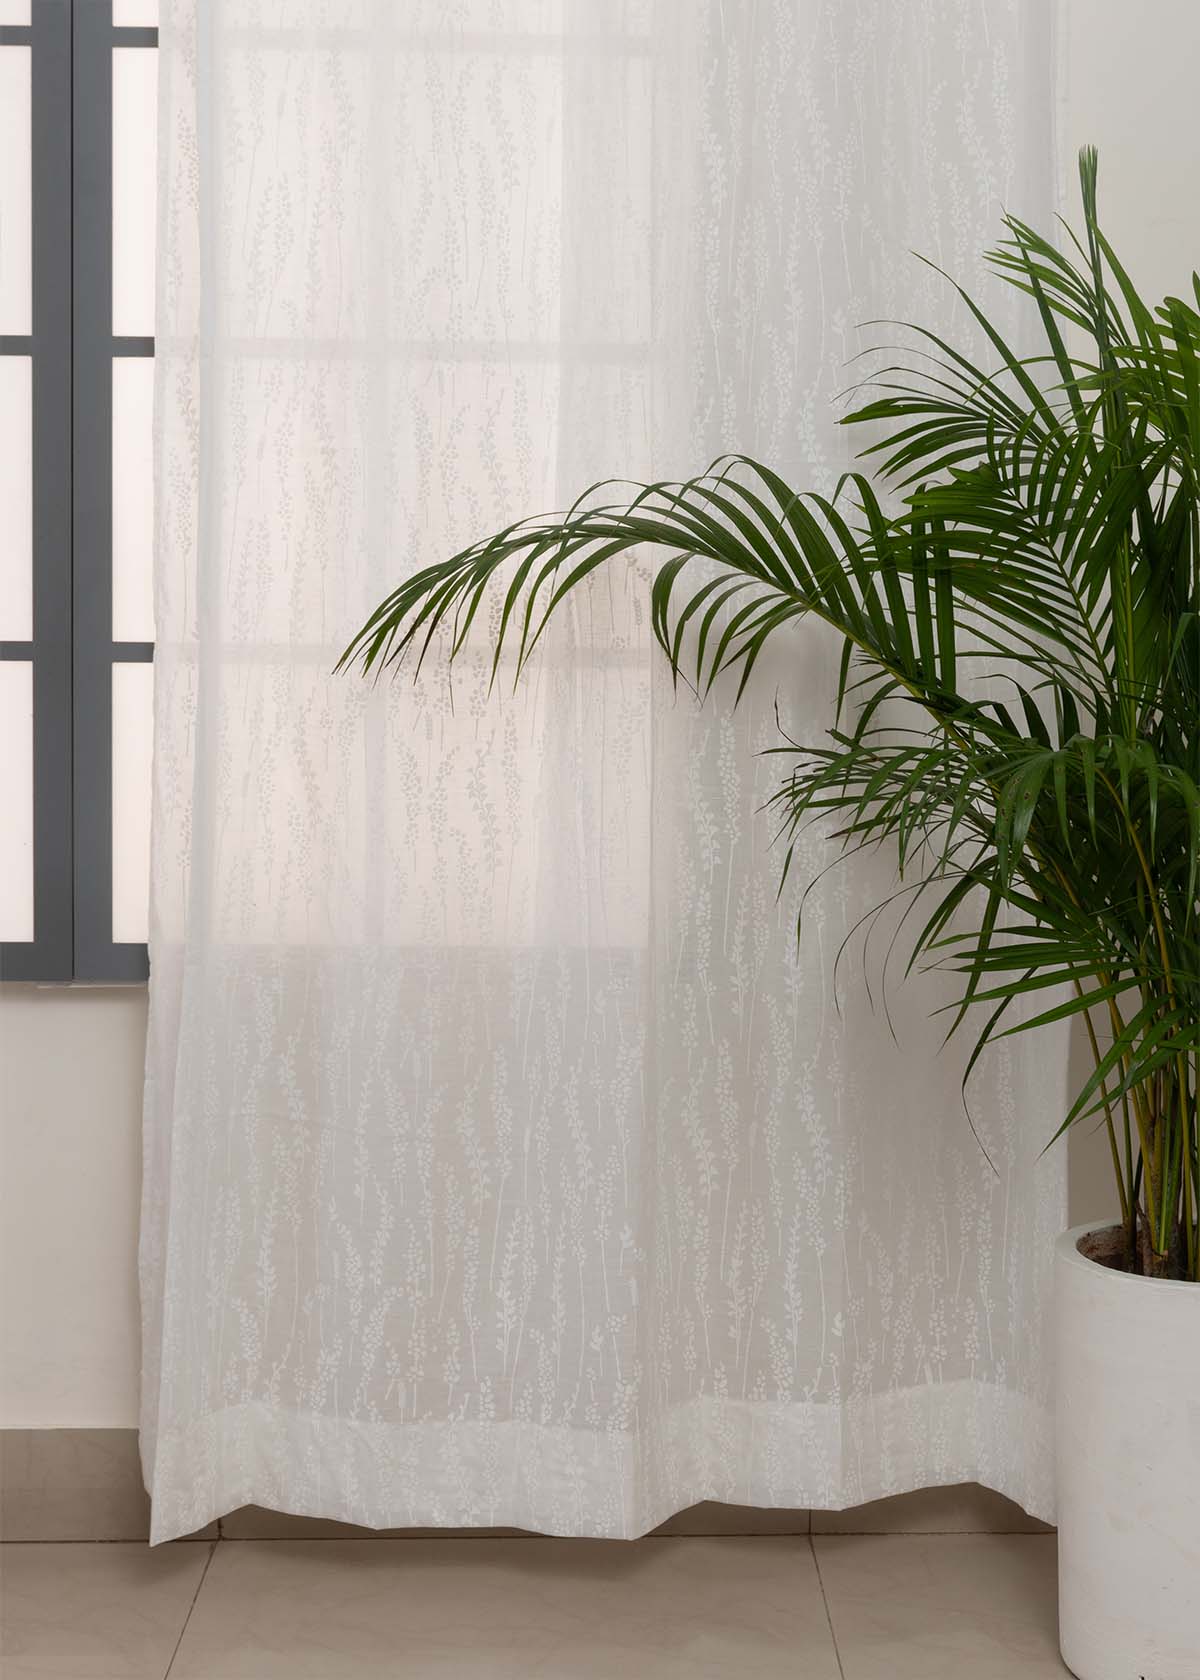 Grass fileds  100% Customizable Cotton sheer floral curtain for living room -  Light filtering - White